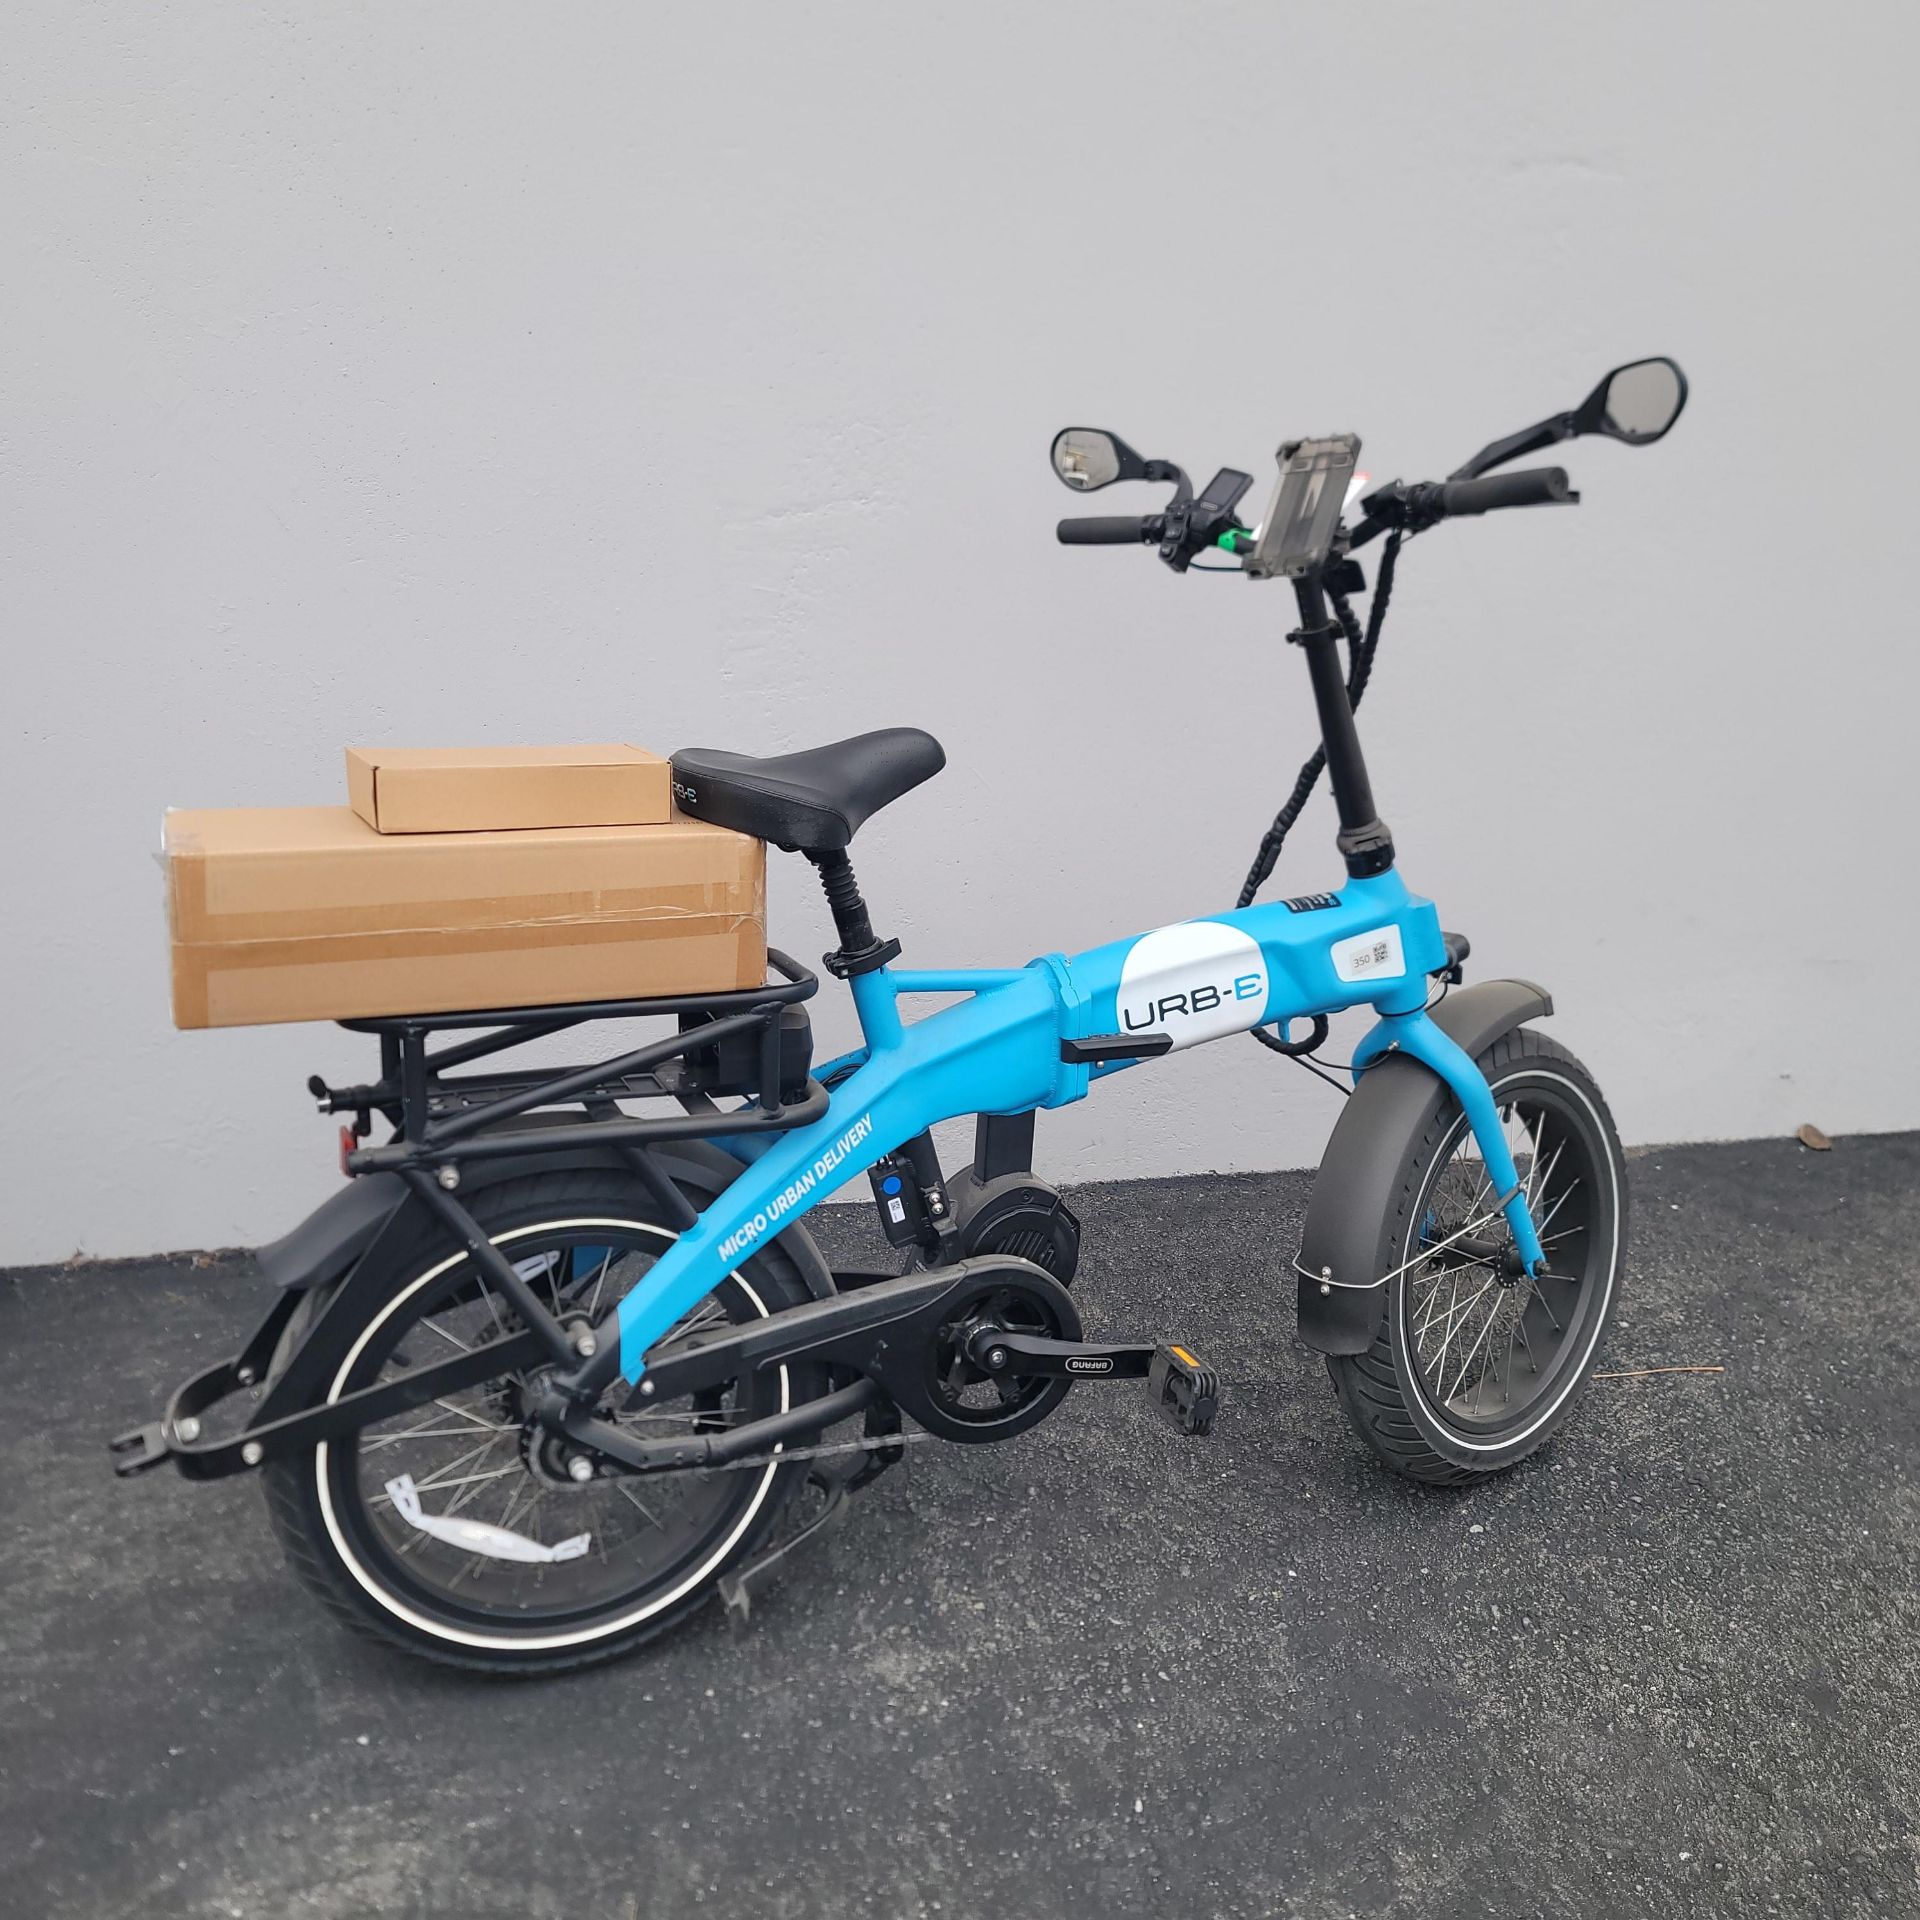 URB-E ELECTRIC DELIVERY BIKE, NEW, 750W MID DRIVE MOTOR, THREE SPEED, THUMB THROTTLE WITH PEDAL - Image 2 of 6